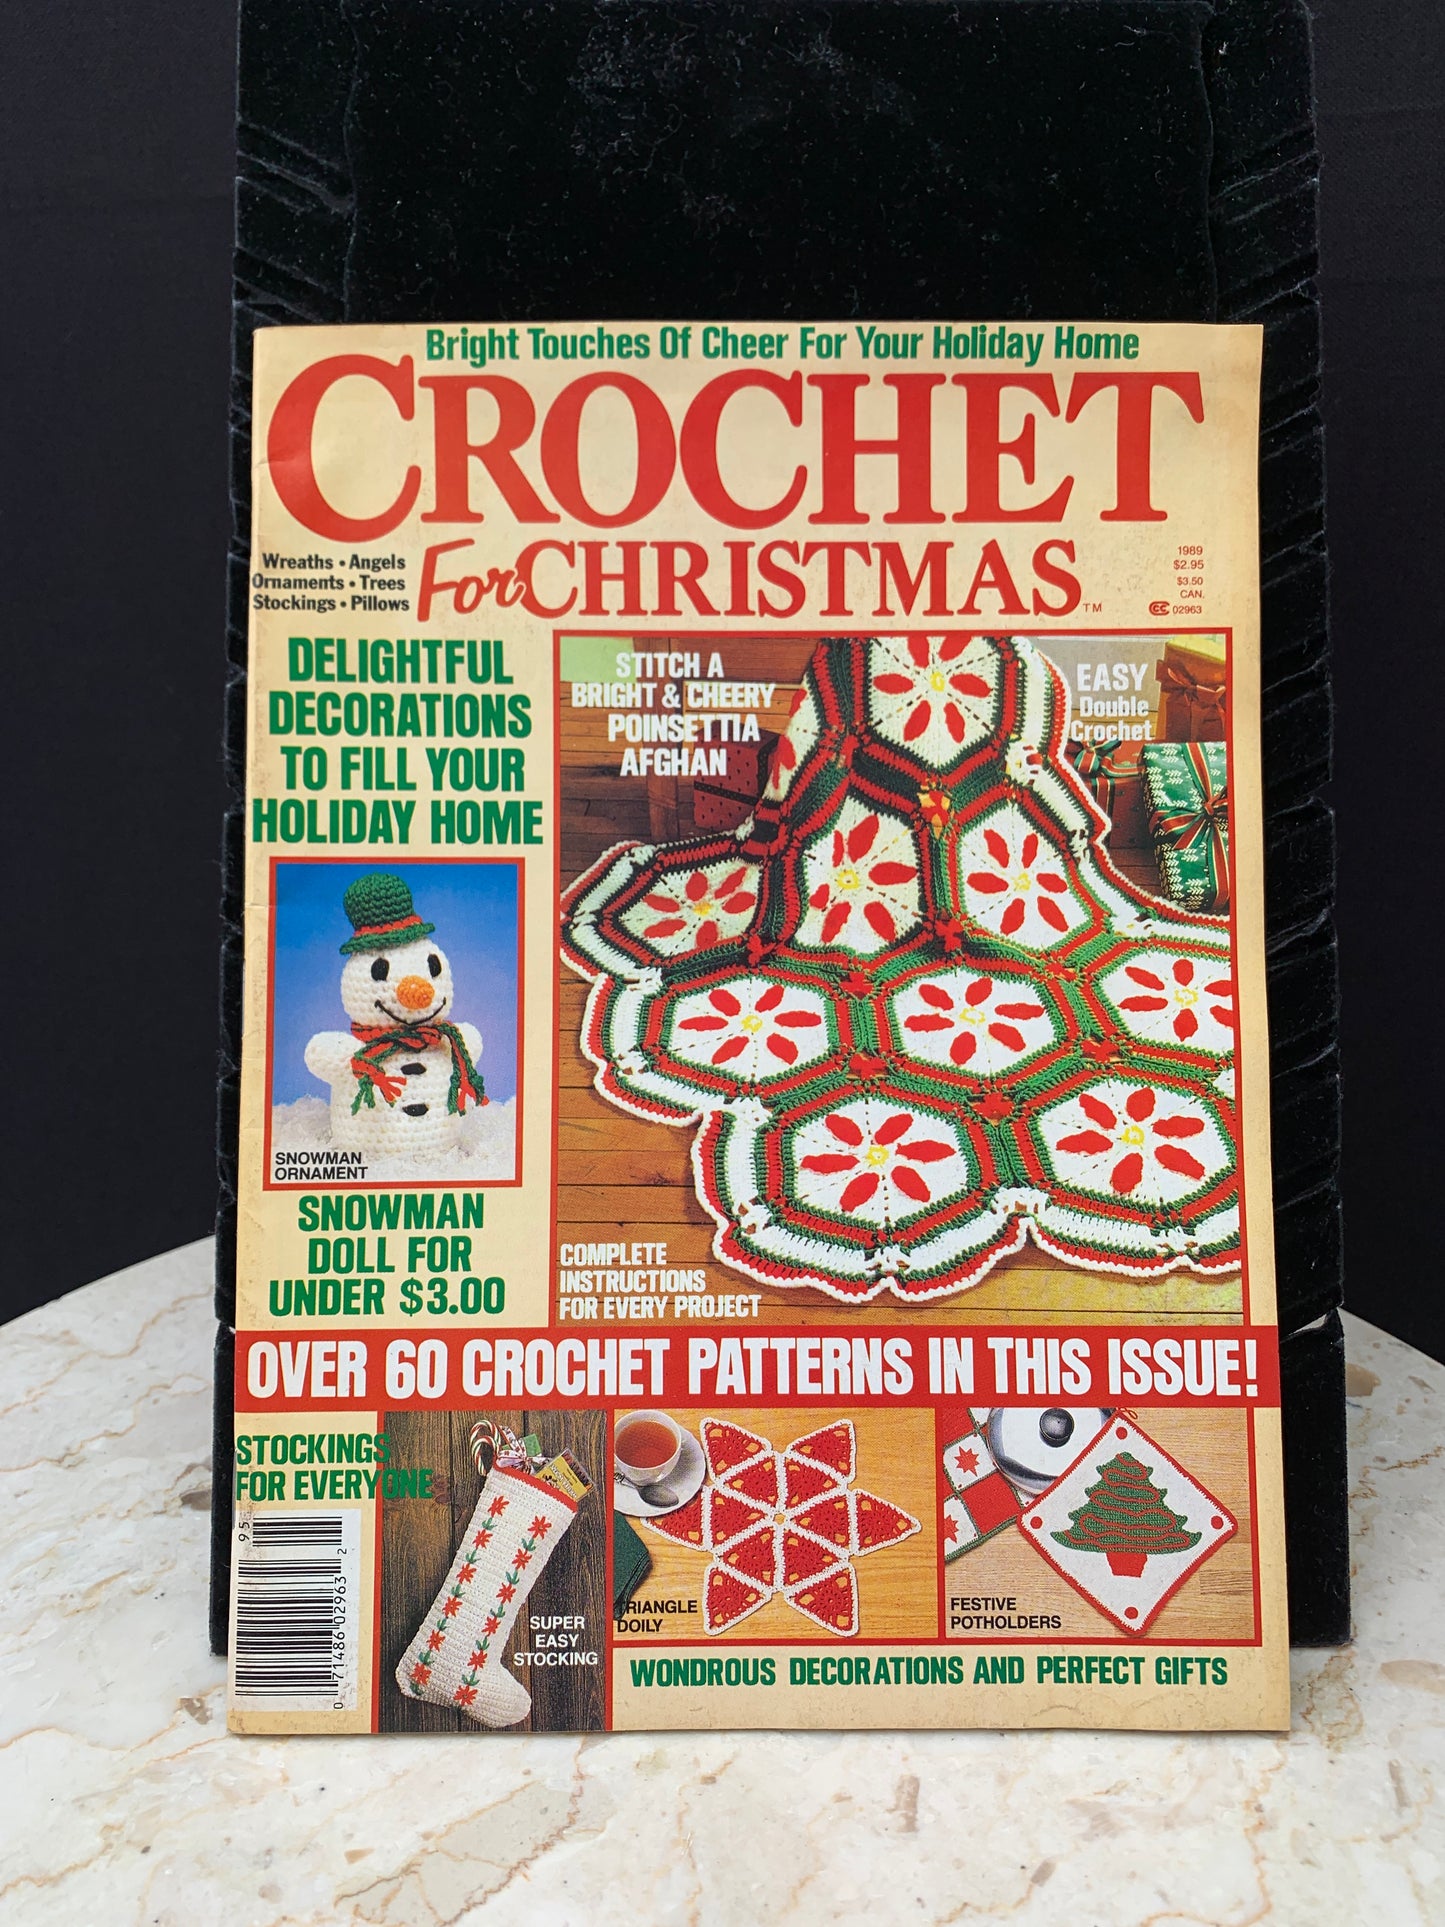 Vintage Christmas Craft Pattern Book Crochet for Christmas 1989